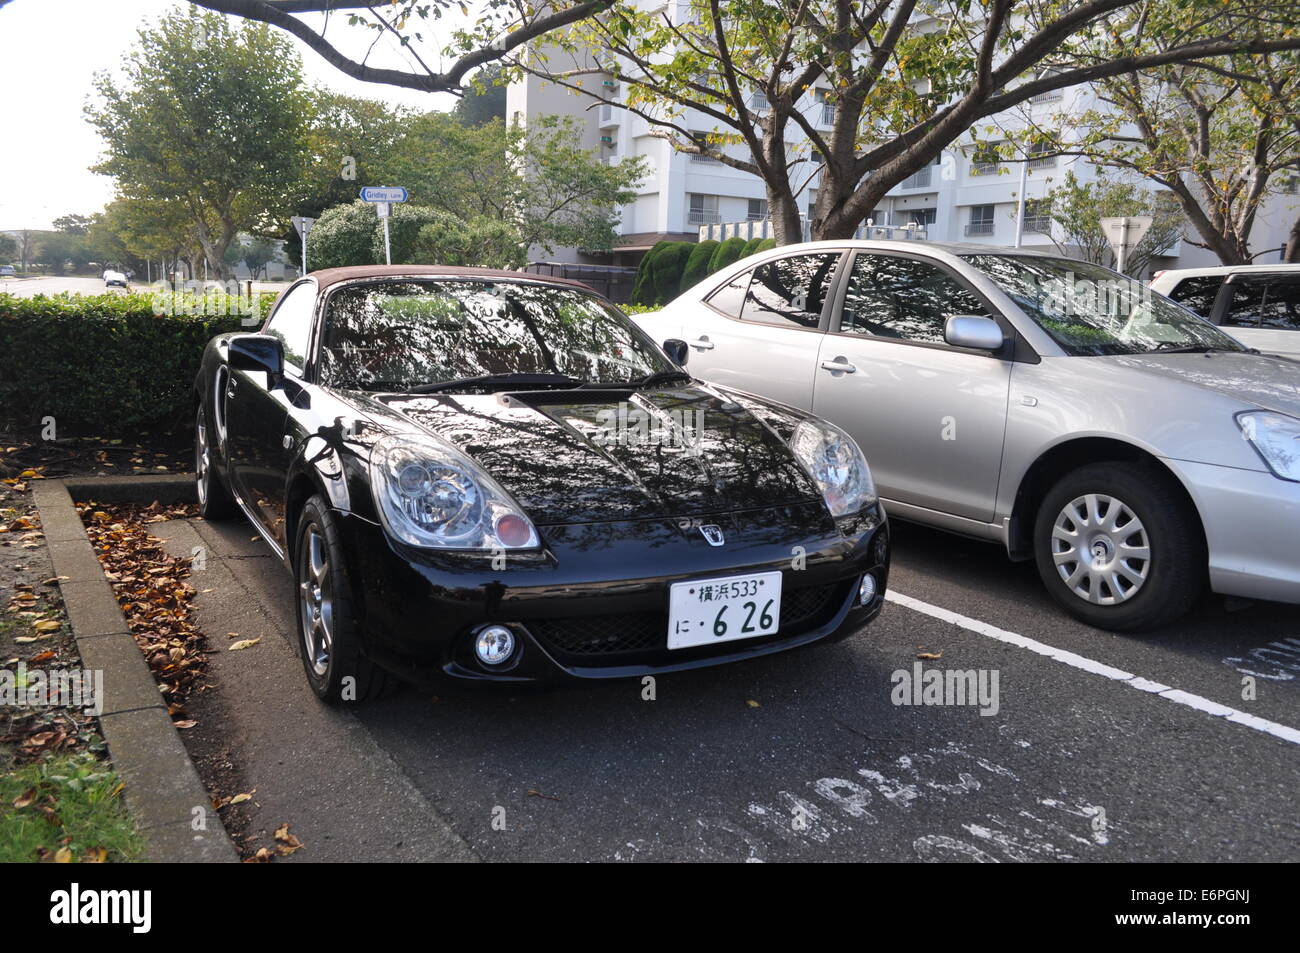 Photograph of a Japanese roadster sports car, taken outside, next to a common economy car Stock Photo